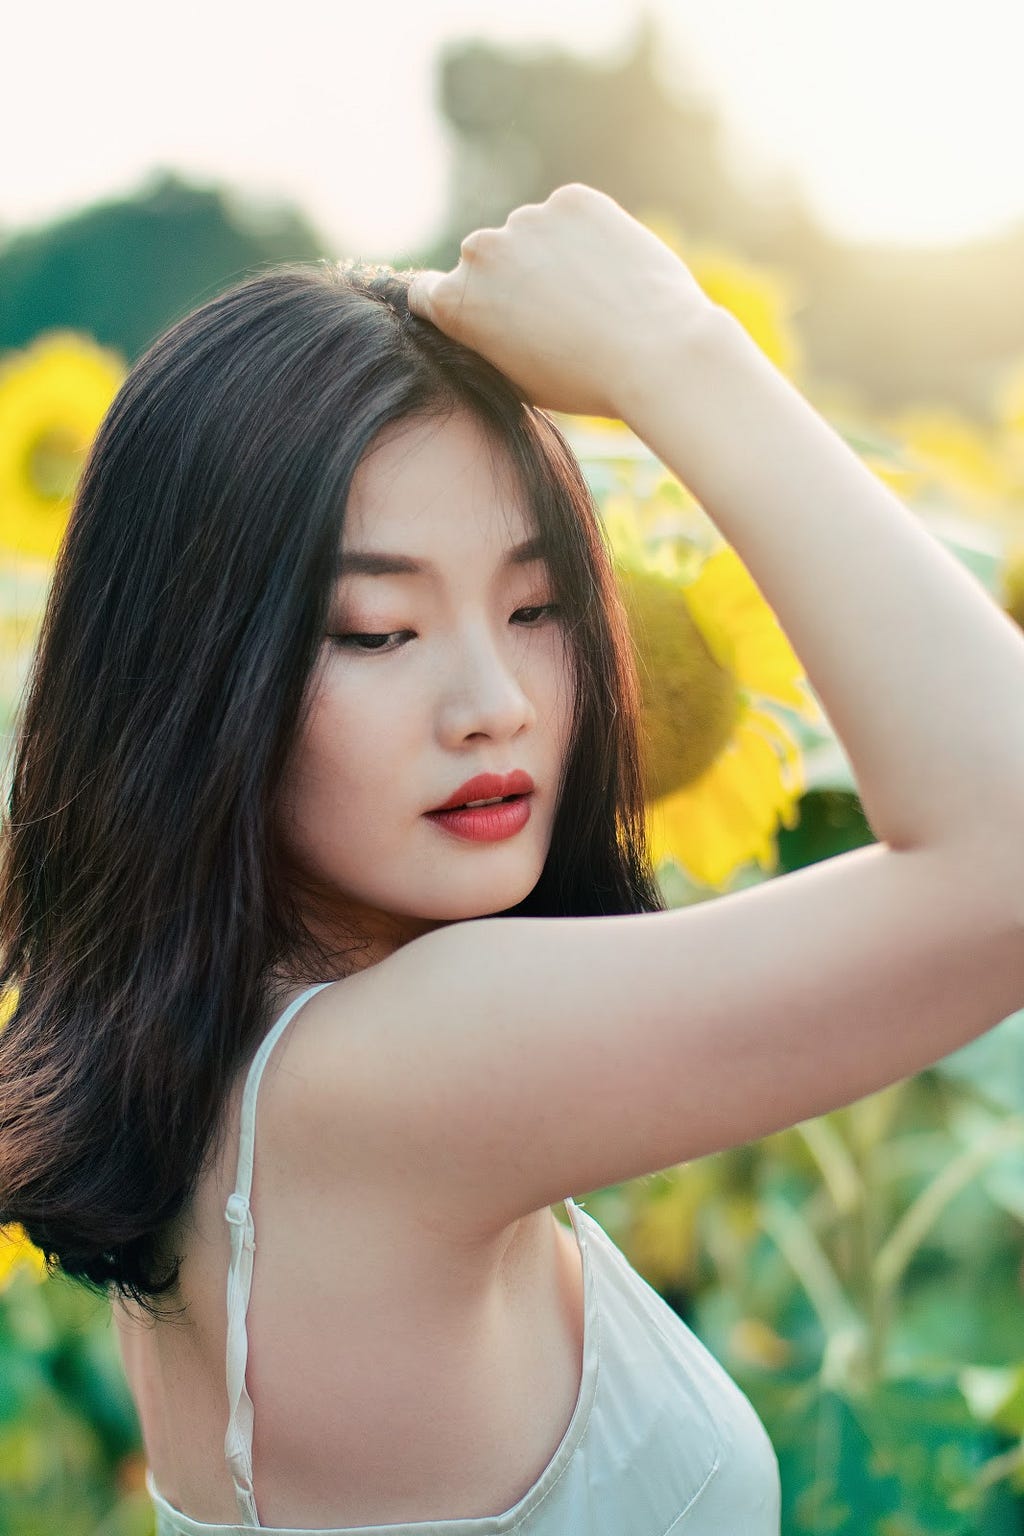 A photo of an Asian woman in a white tank top